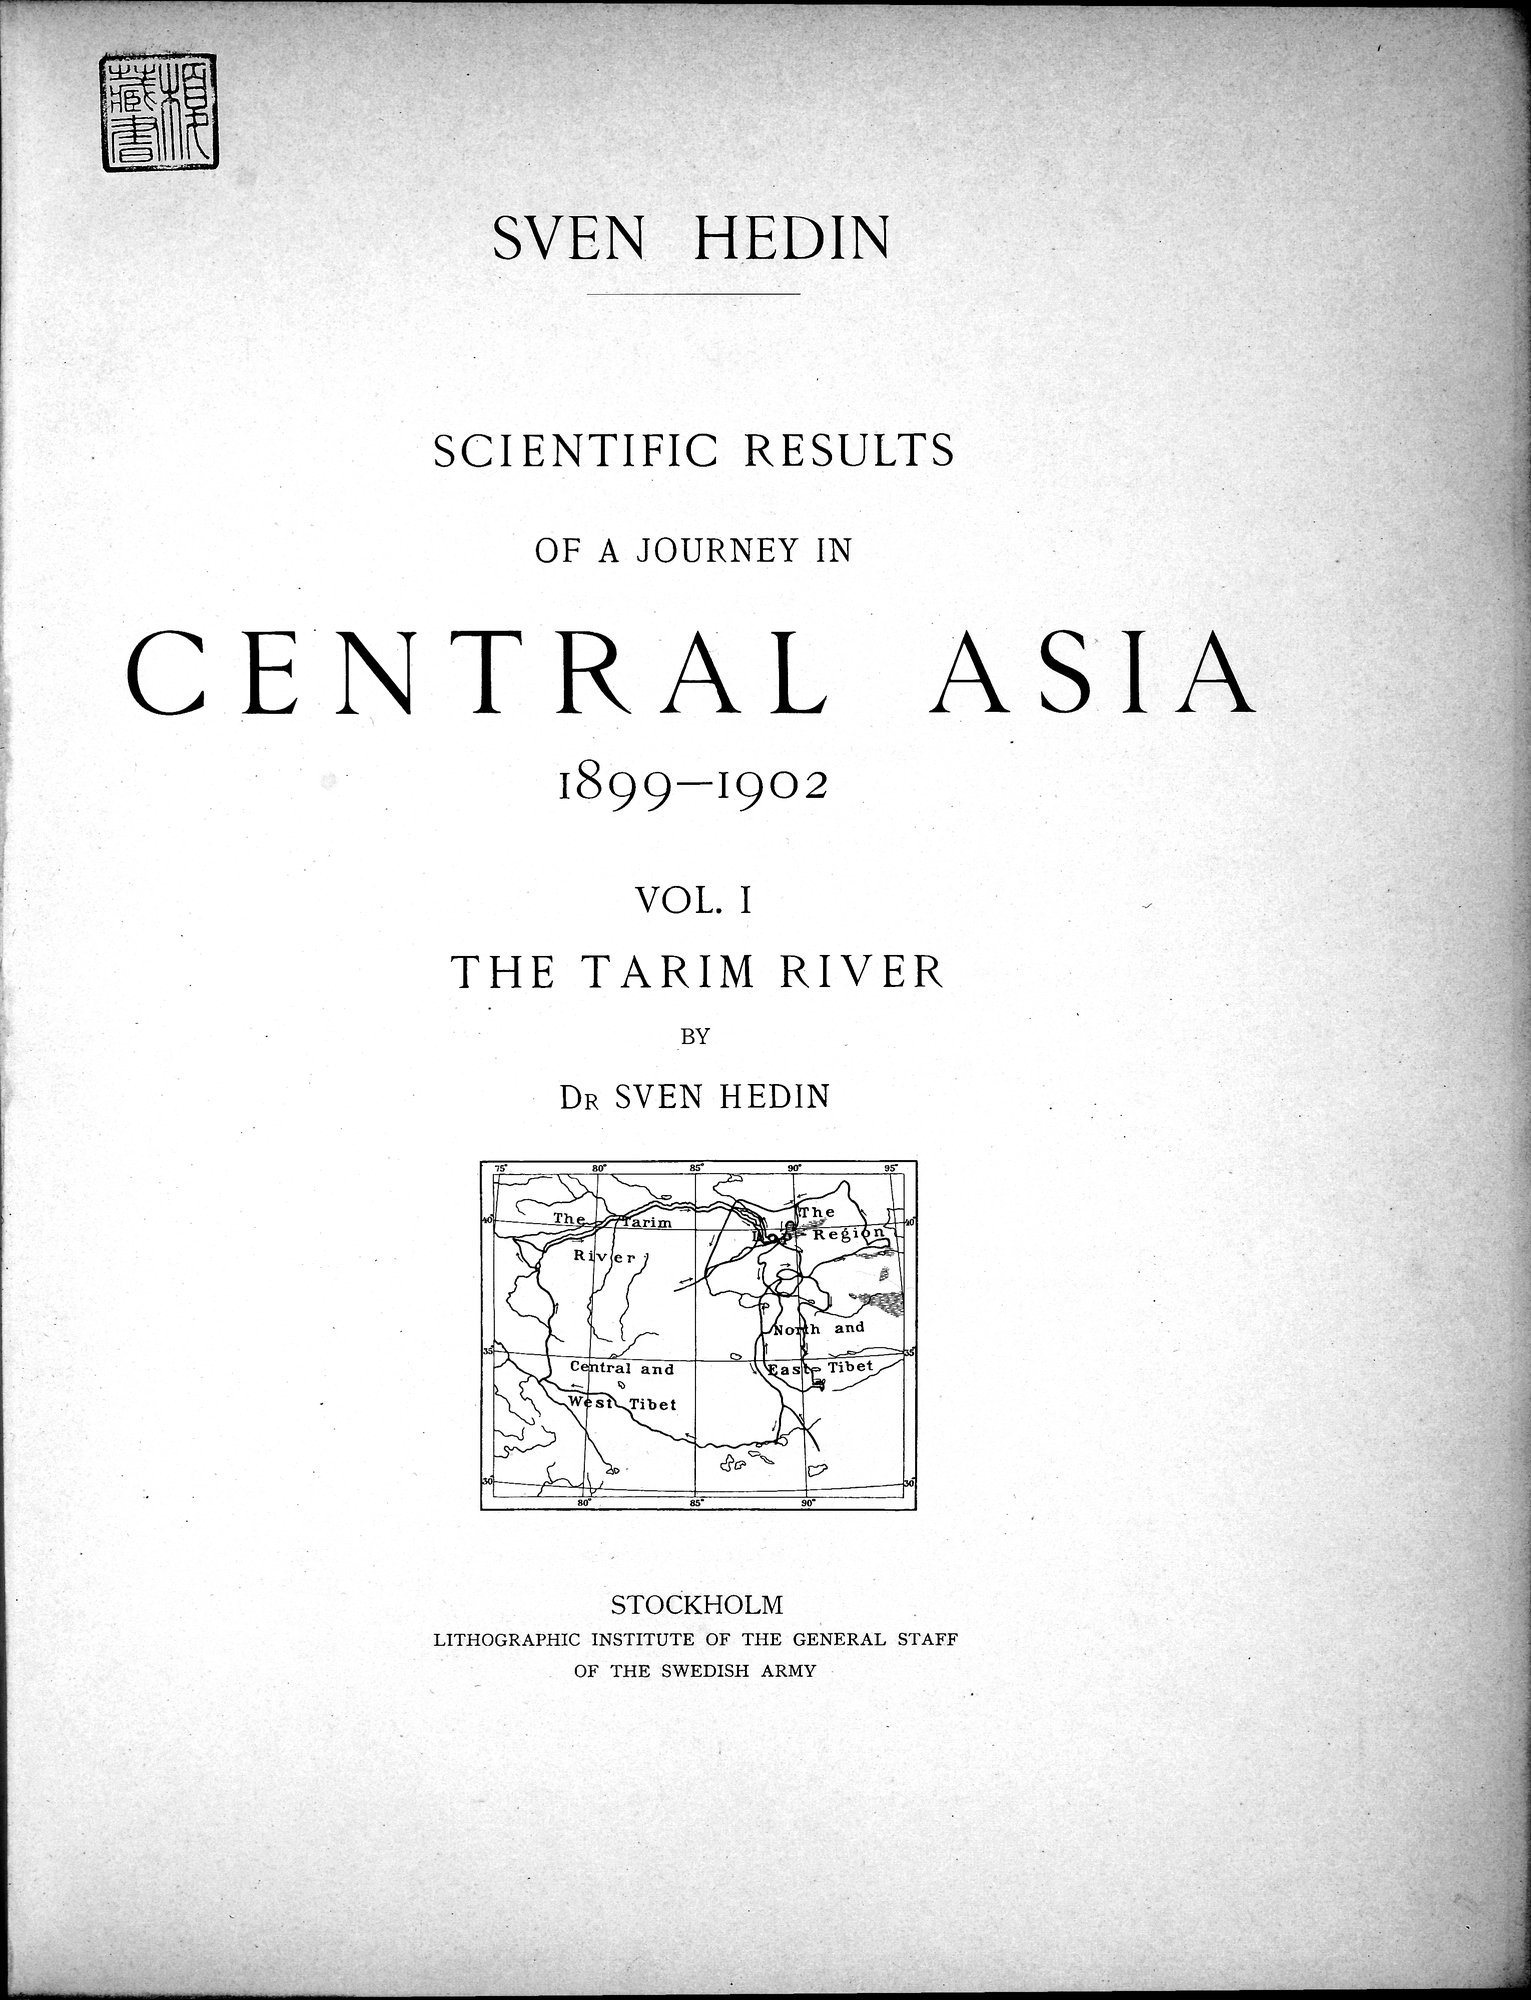 Scientific Results of a Journey in Central Asia, 1899-1902 : vol.1 / 9 ページ（白黒高解像度画像）